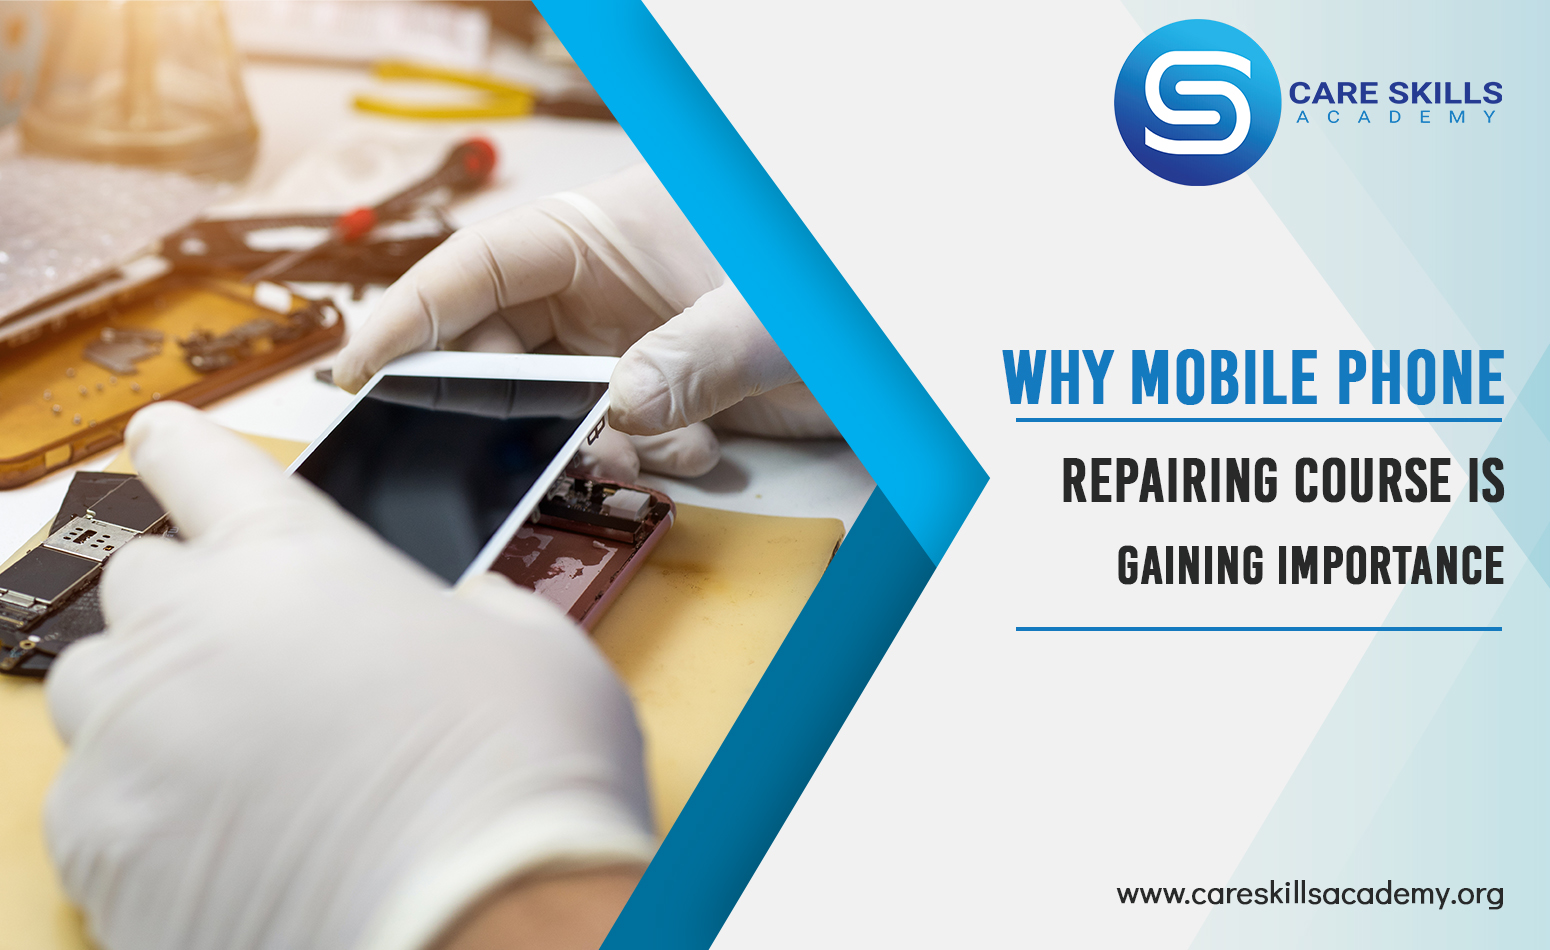 Why Mobile Phone Repairing Course Is Gaining Importance